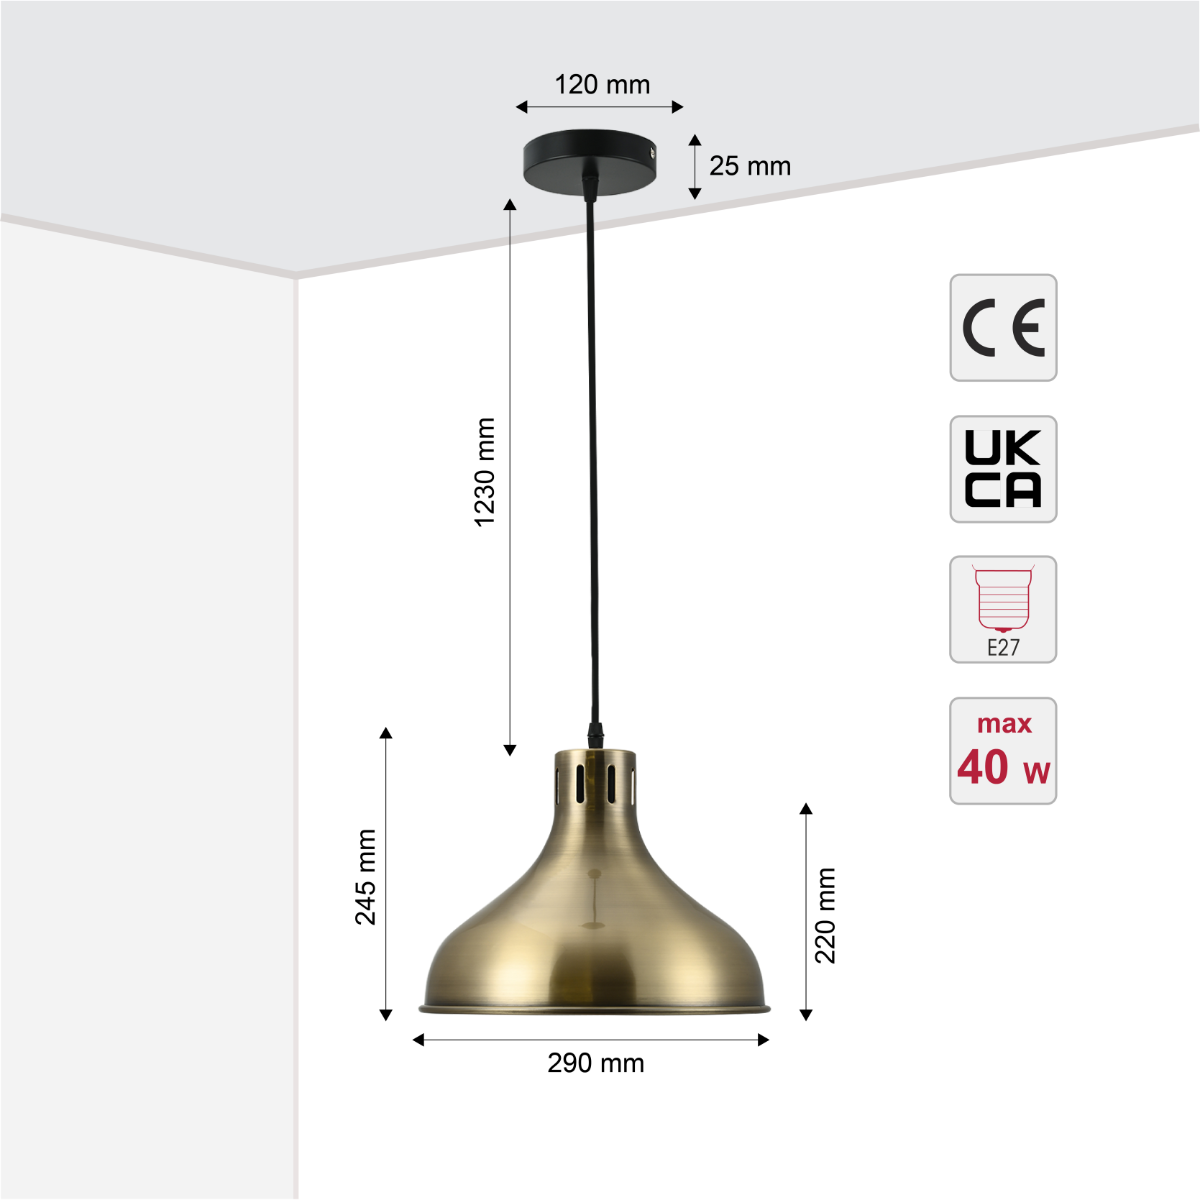 Size and certifications of Artisan Onion Dome Pendant Light 150-18437